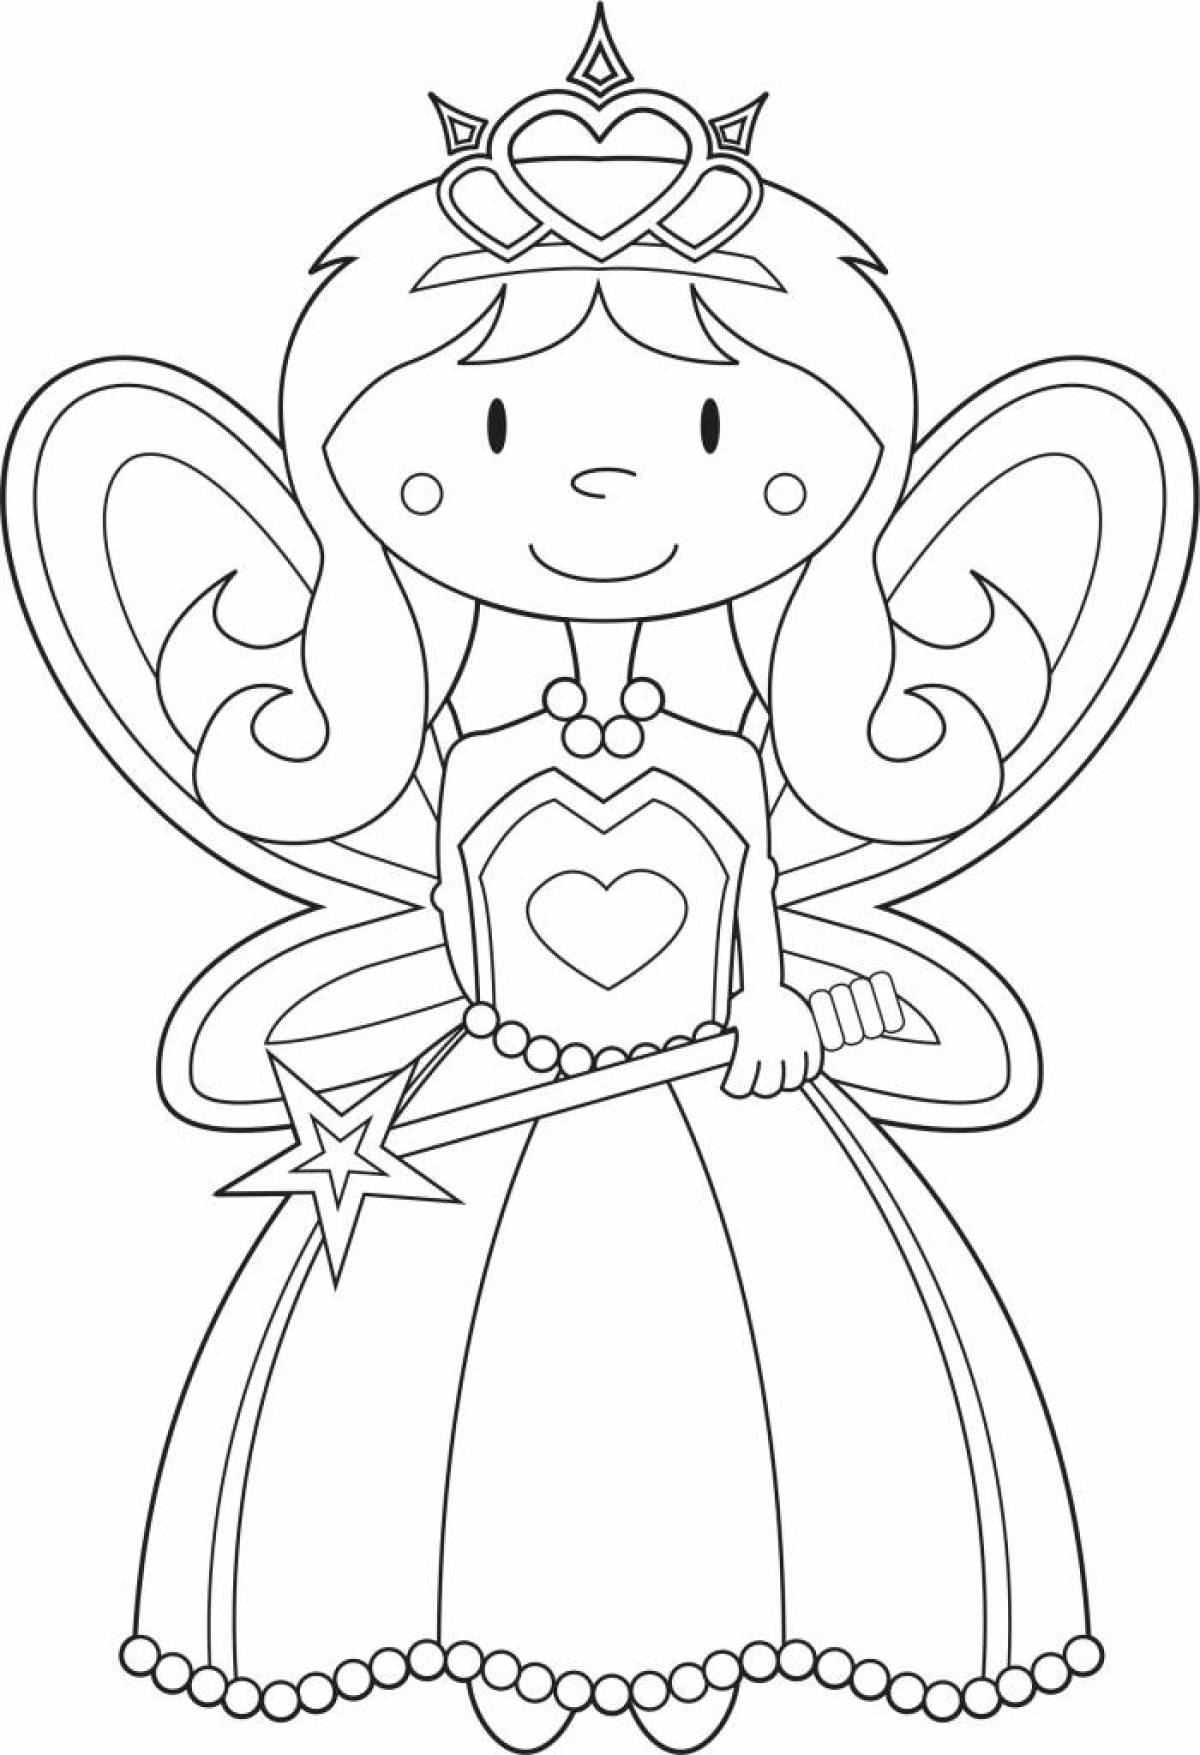 Magic princess coloring pages for kids